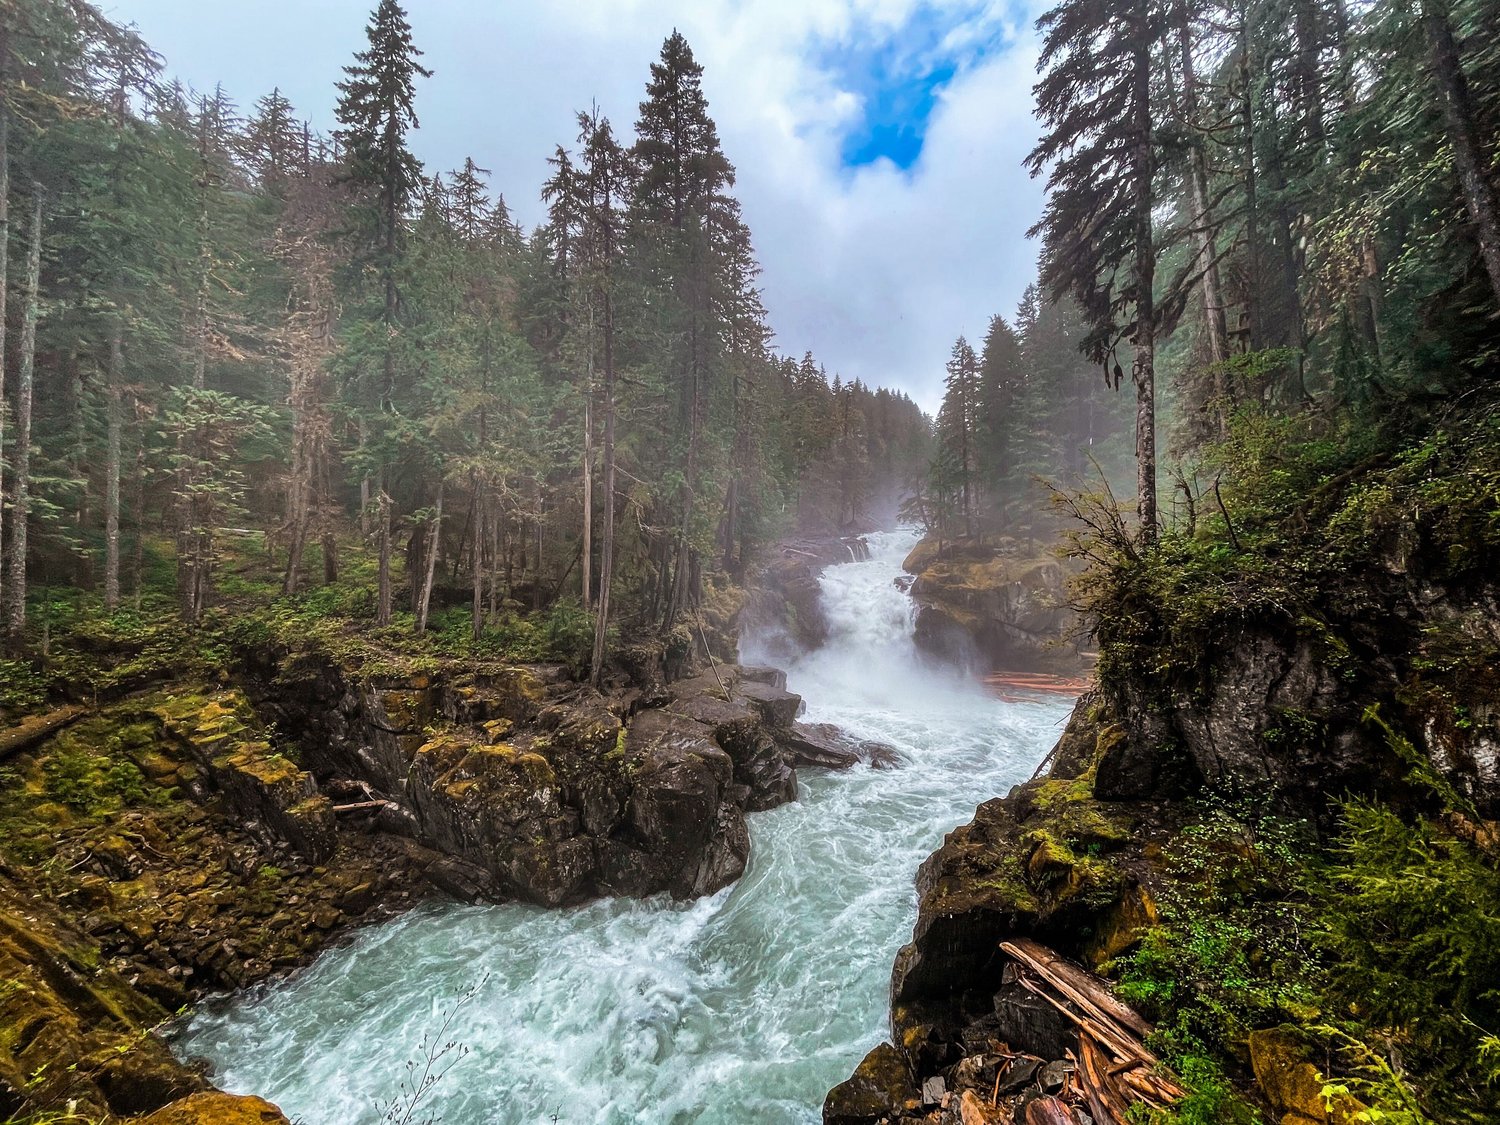 The Ohanapecosh River cascades at Silver Falls in Mount Rainier National Park on Sunday, June 5, 2022.